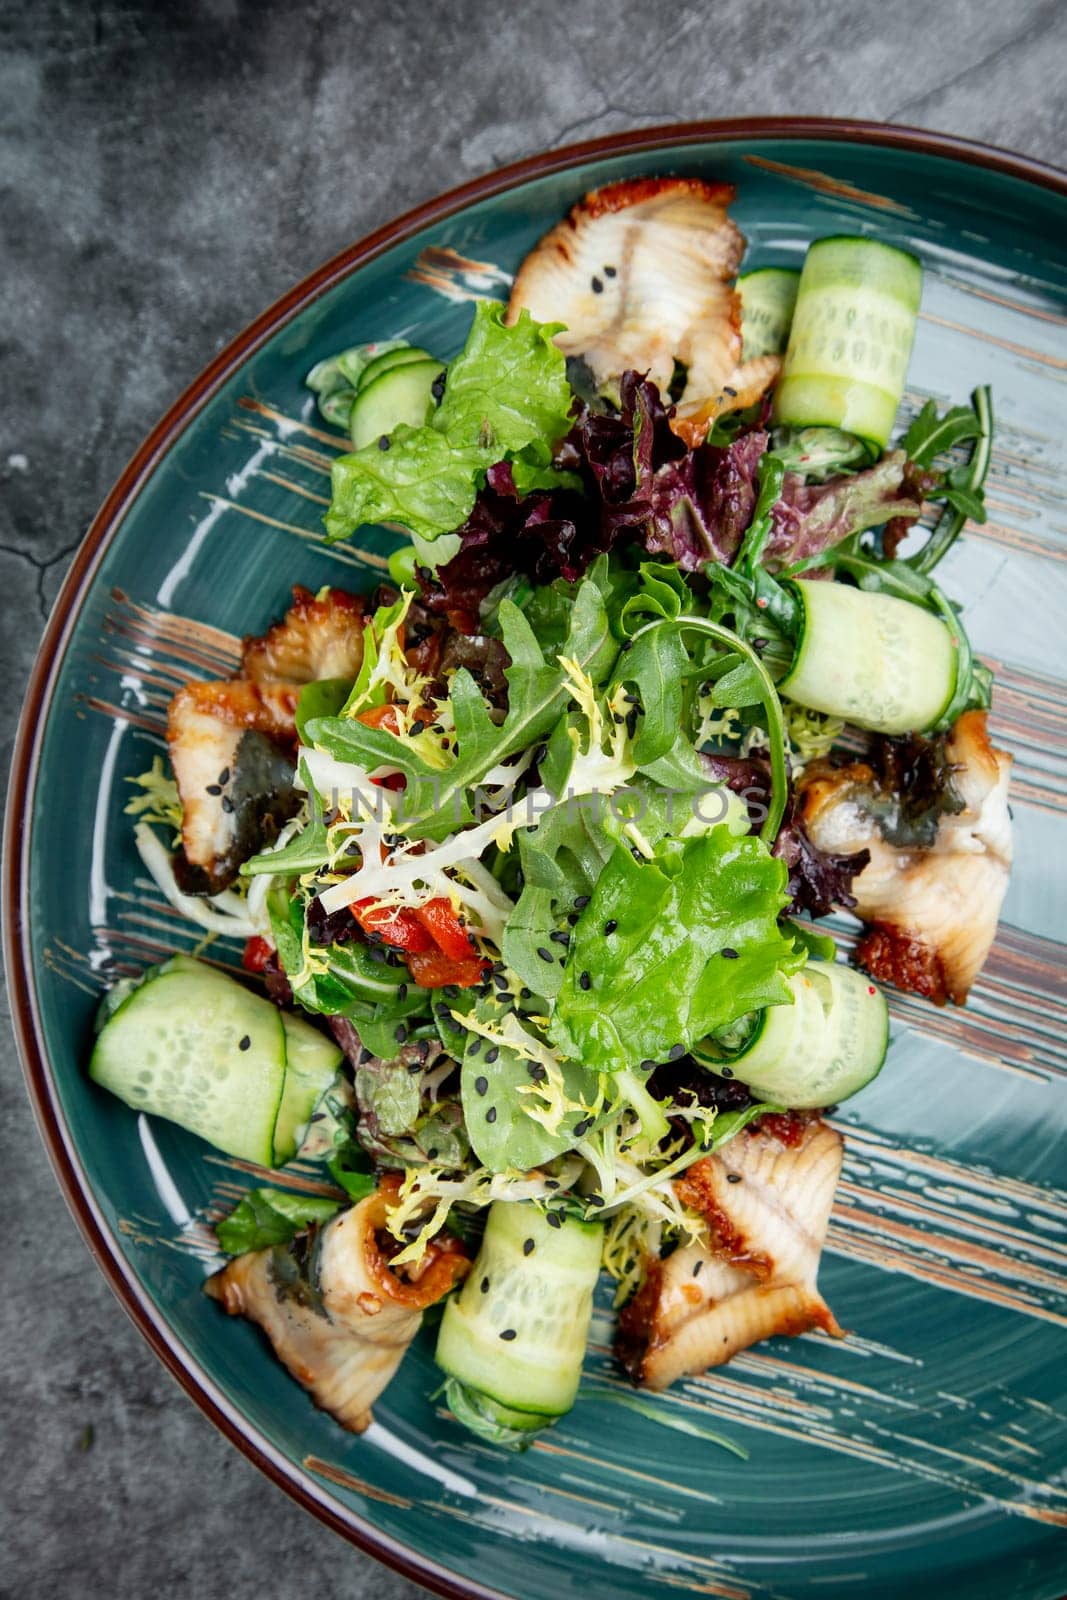 salad with arugula, lettuce, cucumber rolls, fish and sesame seeds, top view by tewolf